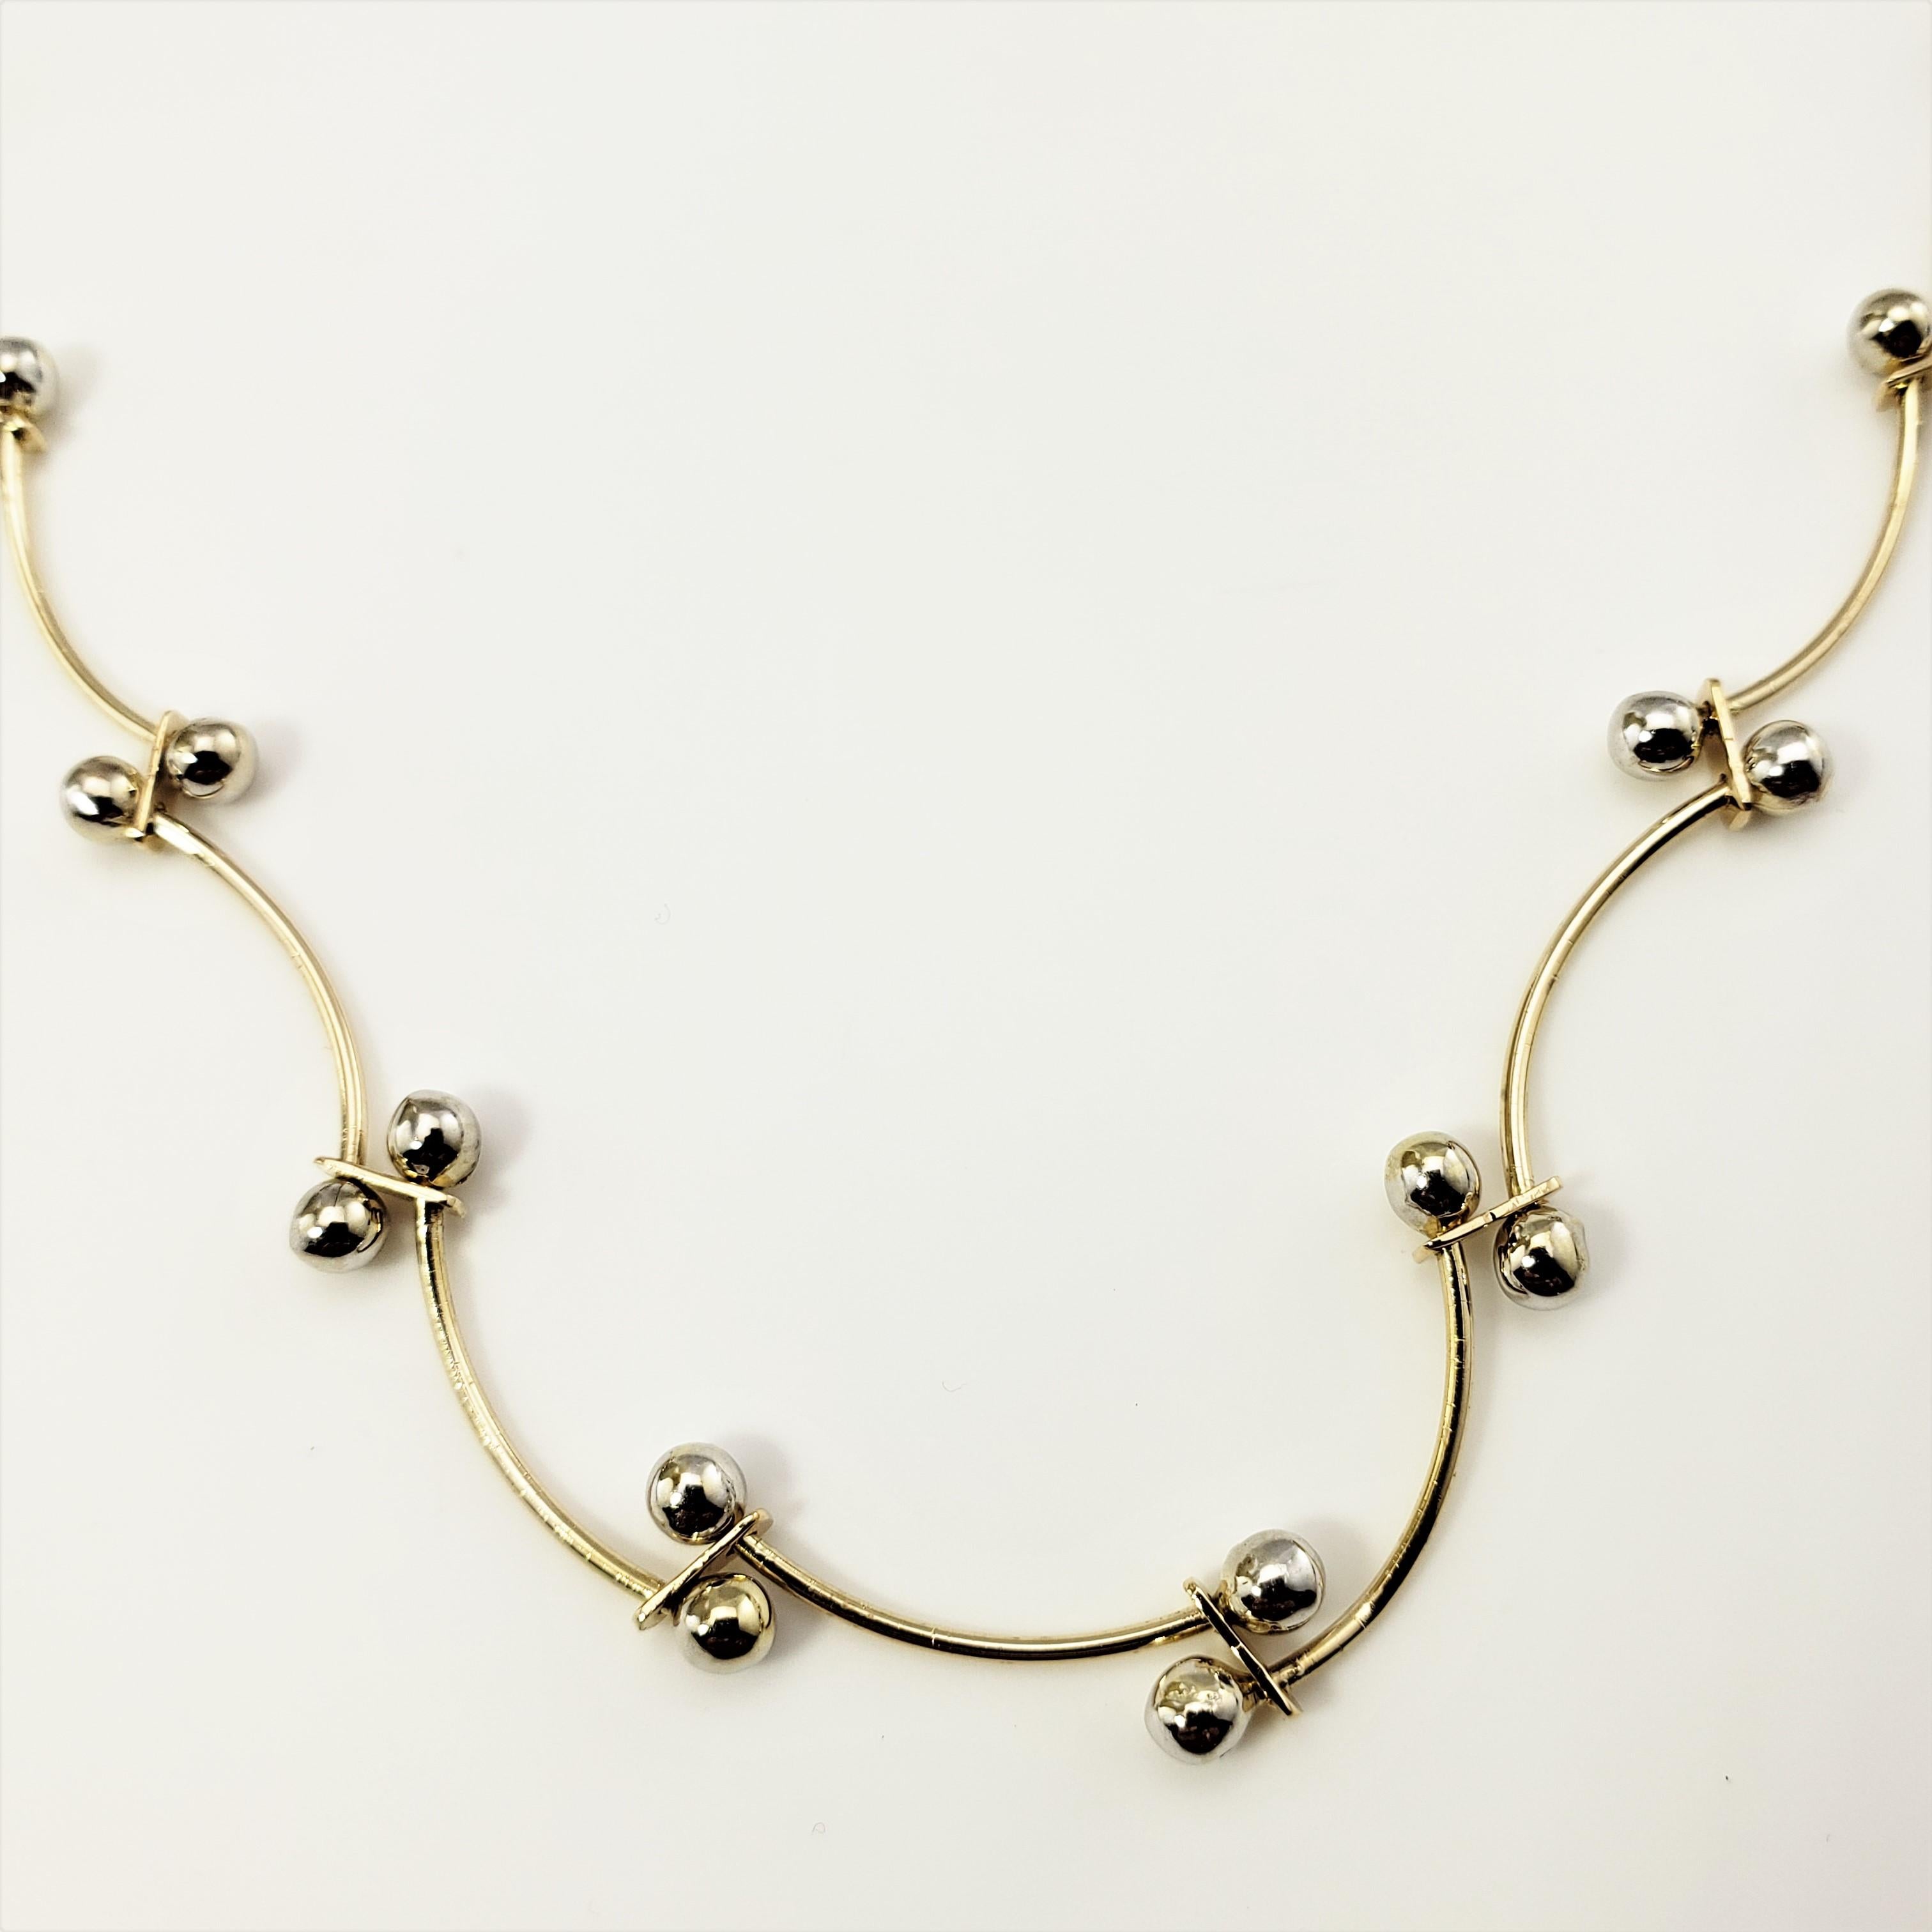 14 Karat Yellow and White Gold Necklace-

This lovely necklace is crafted in beautifully detailed 14K yellow and white gold.

Size:  17.5 inches

Weight:  5.3 dwt. /  8.3 gr.

Stamped: 14K  MEXICO

Very good condition, professionally polished.

Will